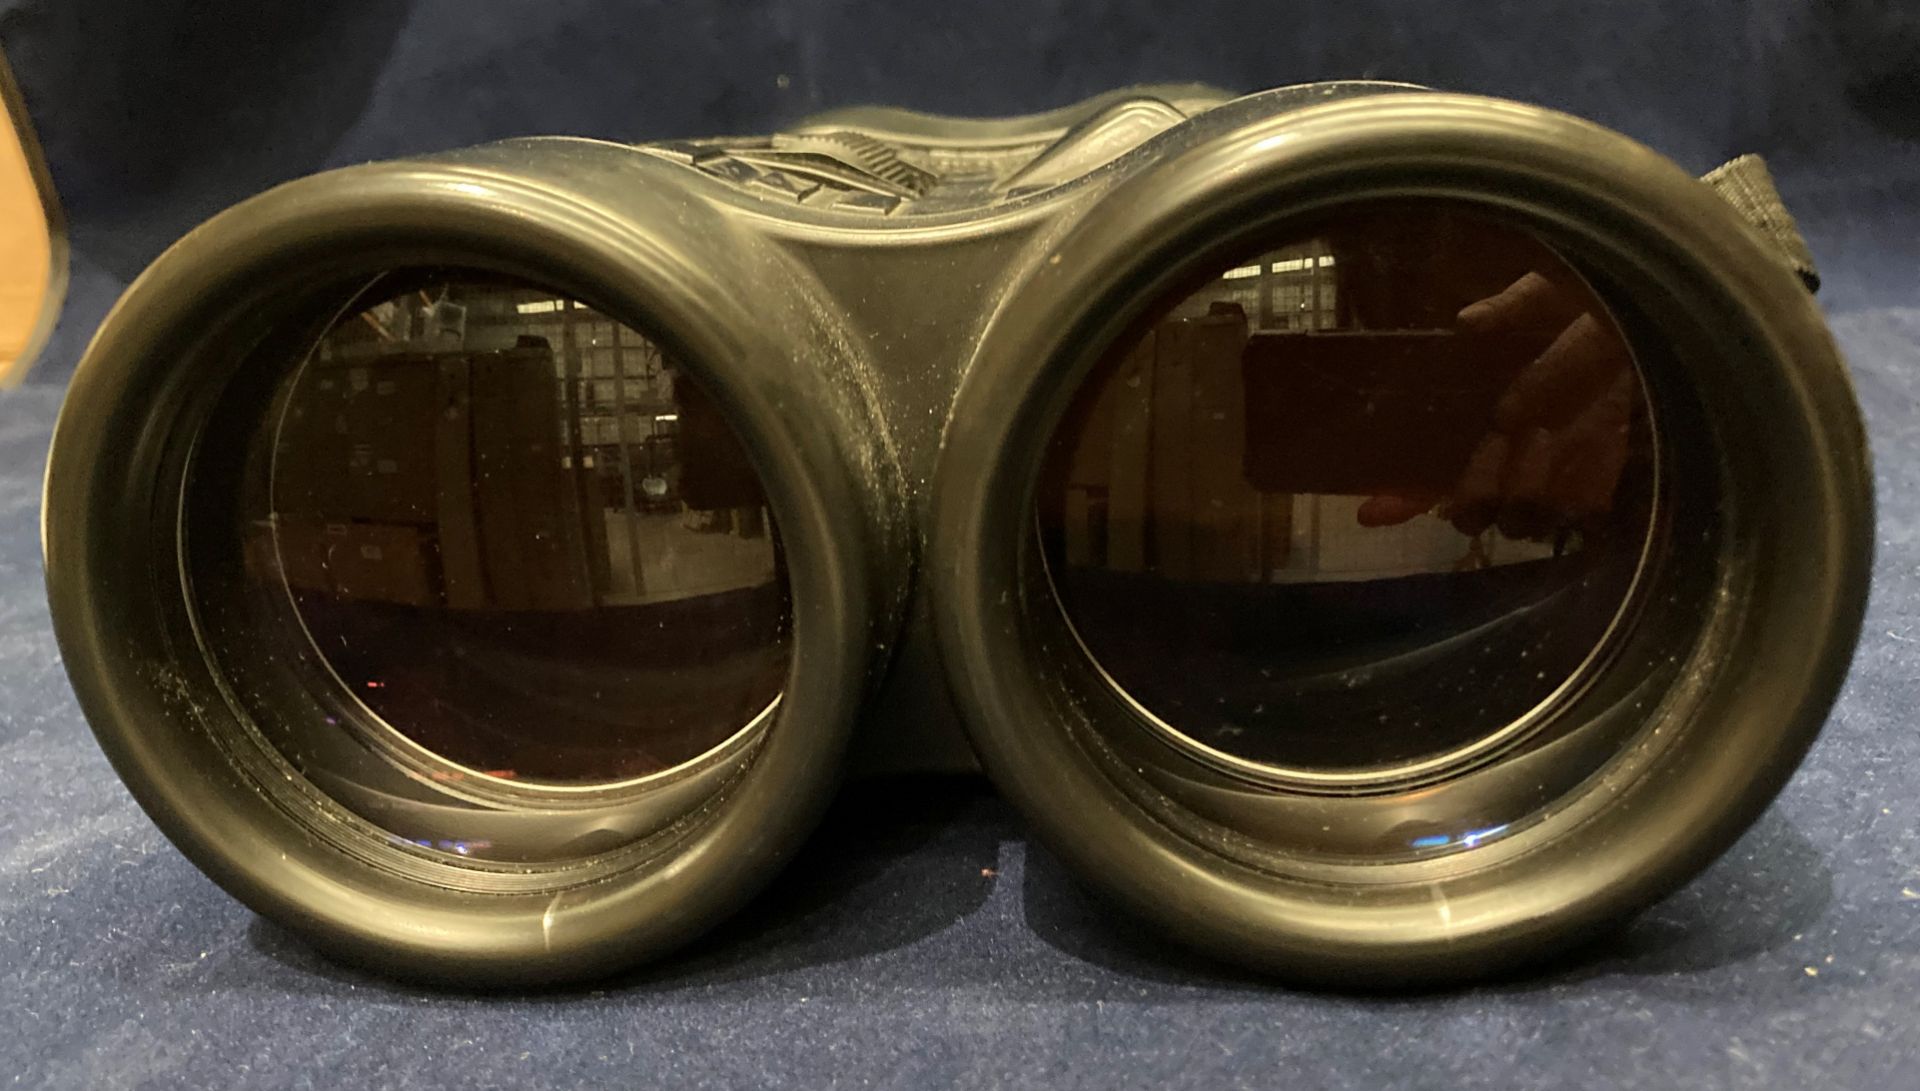 A pair of Zeiss 20x60s made in West Germany binoculars (no case) (Saleroom location: S3 GC1) - Image 5 of 10